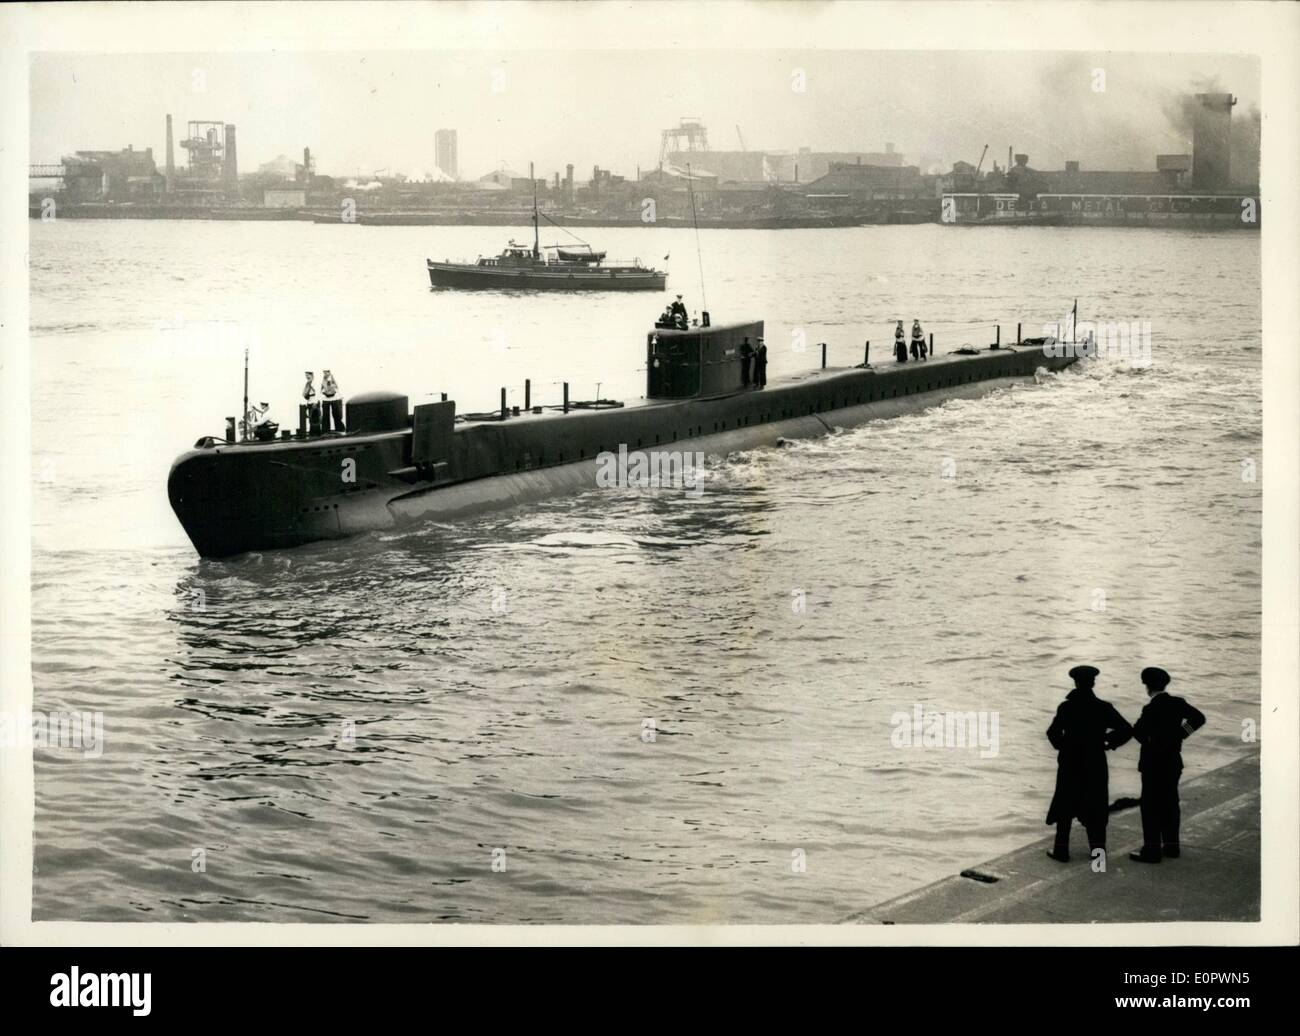 Mar. 03, 1957 - Britain's Newest Experimental Submarine in London H.M.S. Explorer... Visiting the West India Docks is the British experimental submarine H.M.s. Explorer... She is 225 feet long and has a squat streamlined conning tower. She is unarmed and uses high test peroxide in her propulsion engines - and is said to have reached a speed of 25 knots under water. A German experimental team led by Professor Helmut Walther collaborated with British designers when the vessel was under construction. she will remain in London for about a week - but will not be open to the public Stock Photo